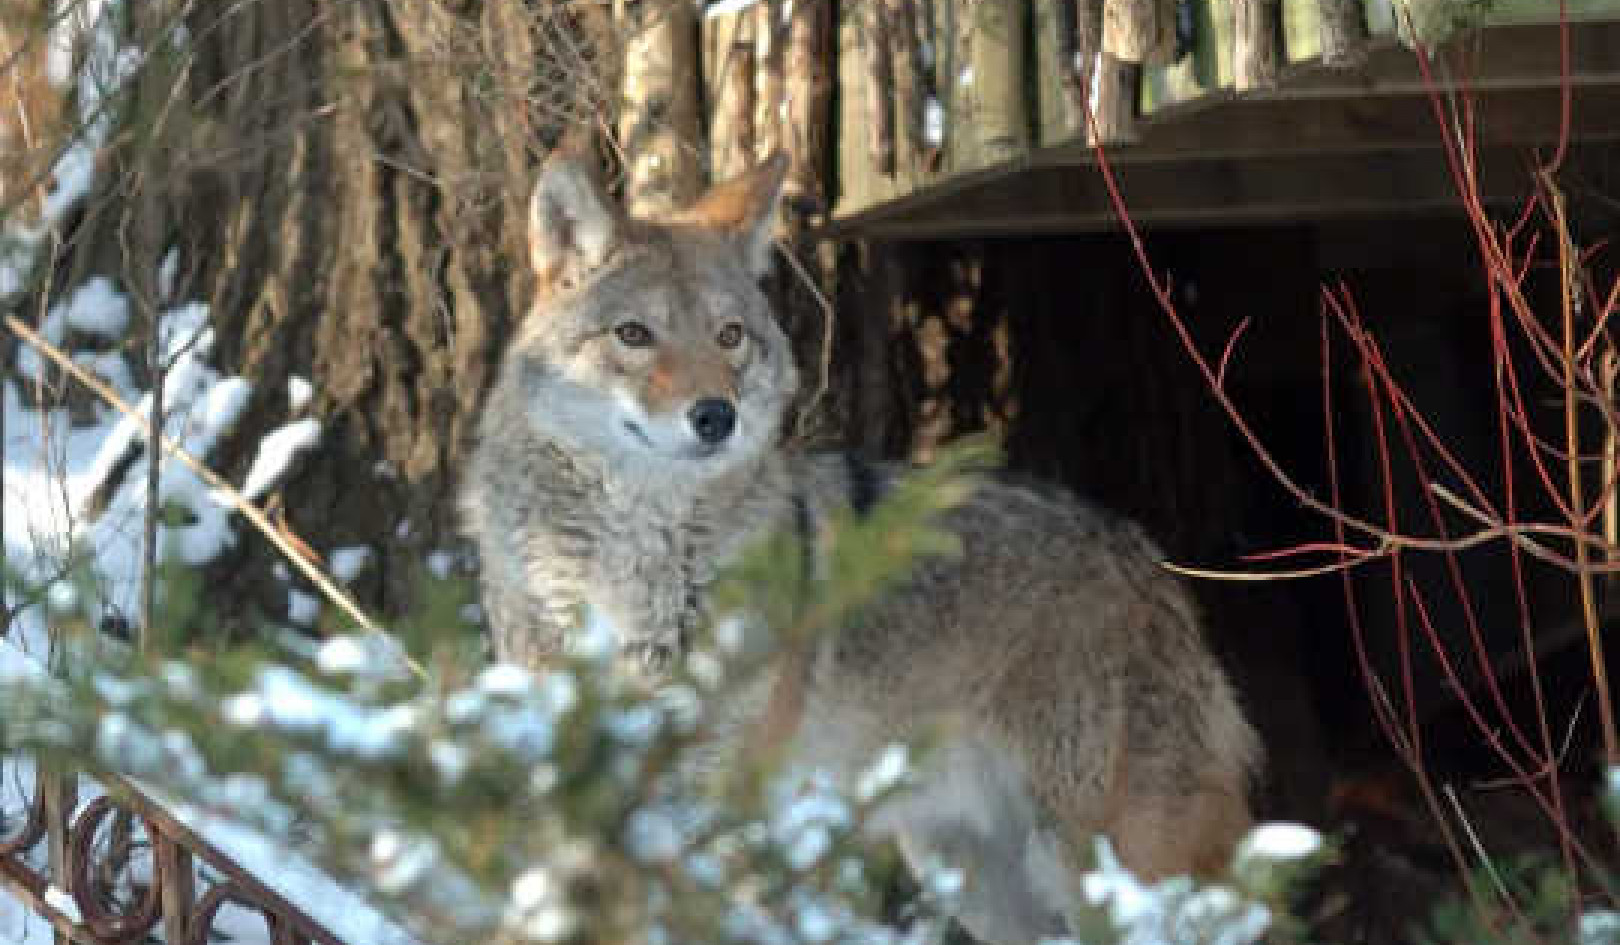 How Coyotes and Humans Can Learn to Coexist in Cities